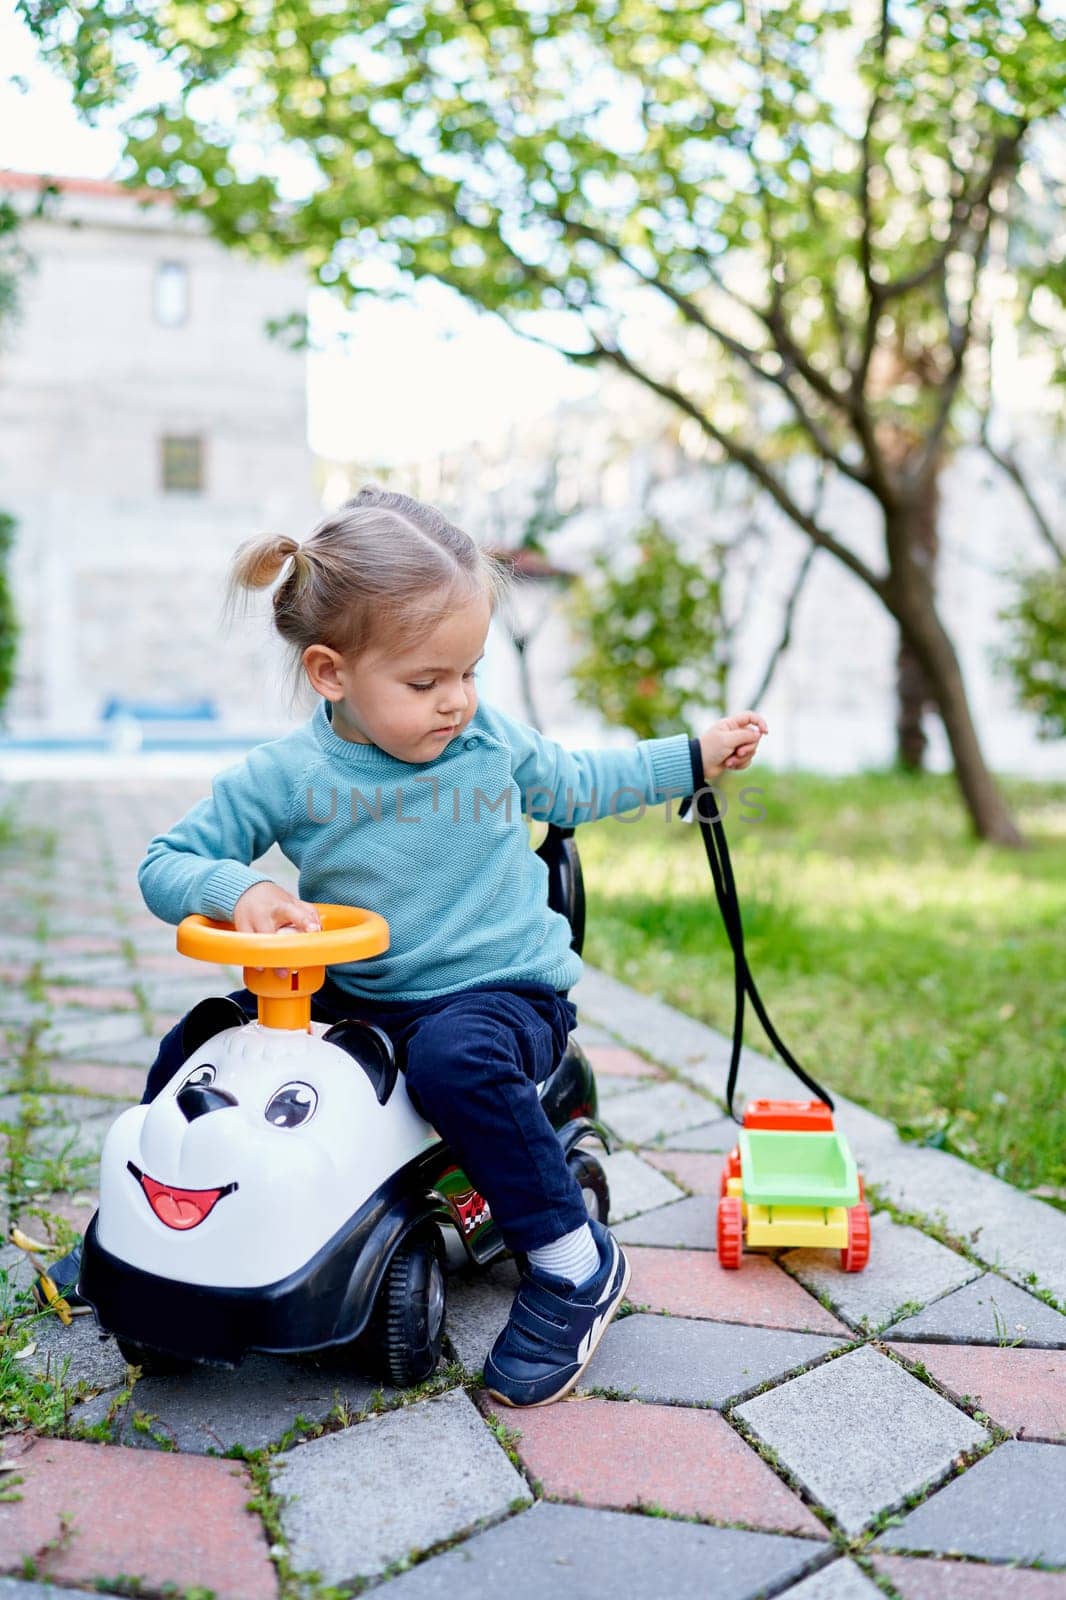 Little girl sitting on a toy car with a small toy car on a rope on a path in the garden by Nadtochiy